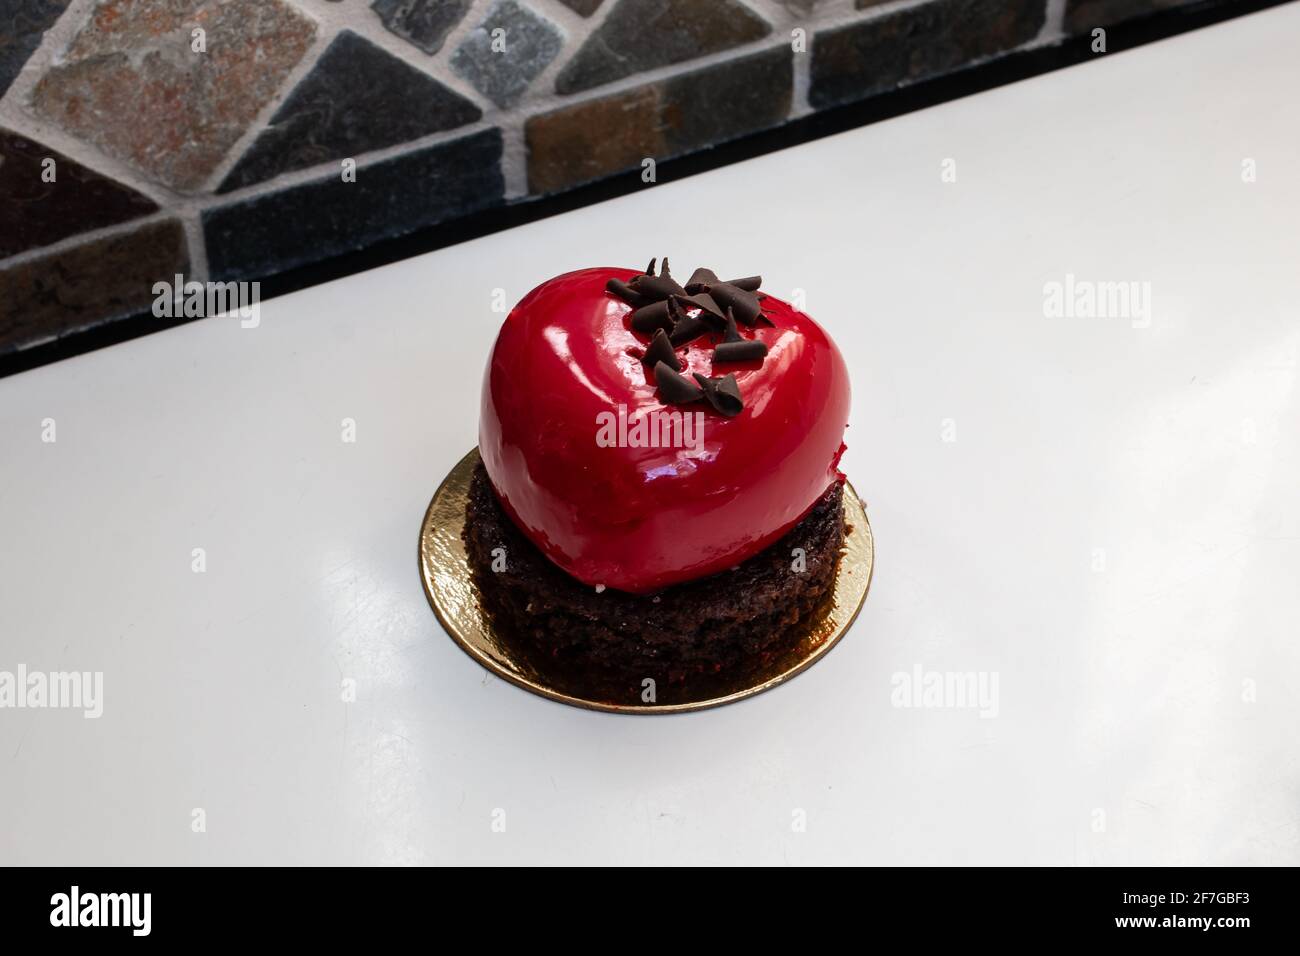 A heart-shaped, cherry-red champagne and berry chocolate miniature cake made for Valentine's Day 2021, Ontario, Canada. Stock Photo